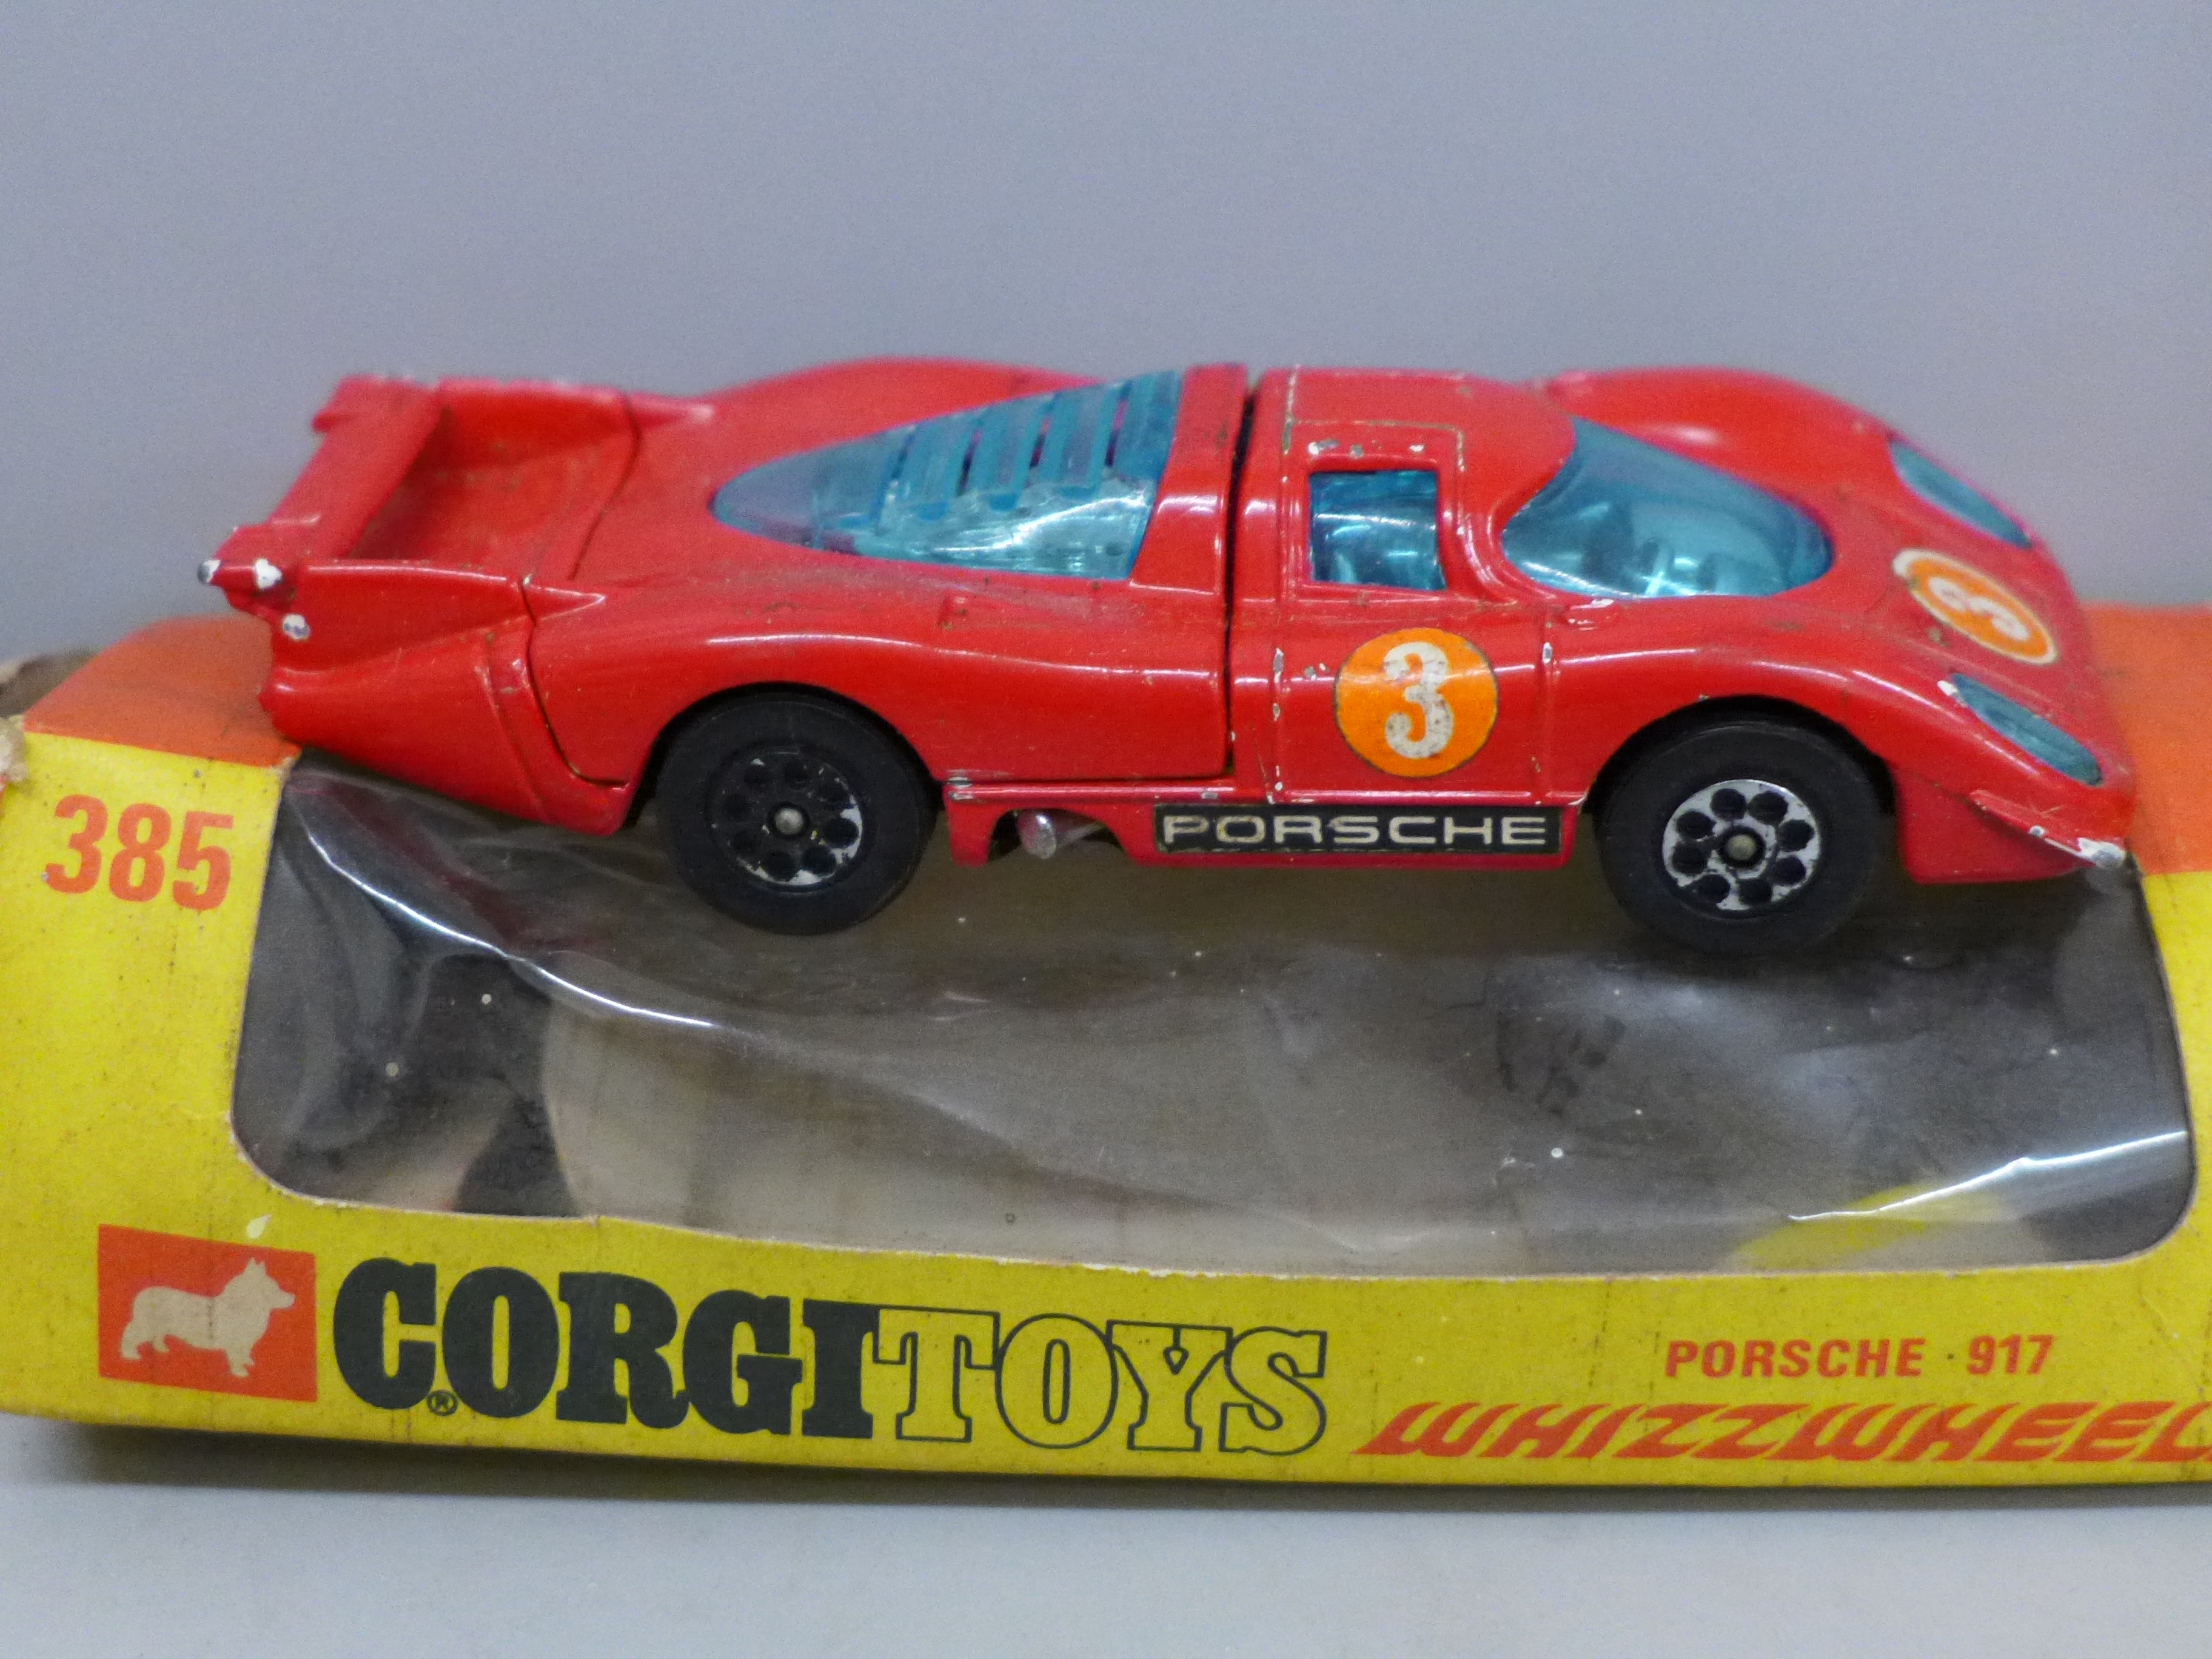 Two Corgi die-cast model cars, Renault 16 T.S and Porsche 917, boxed and a die-cast model train by - Image 4 of 8